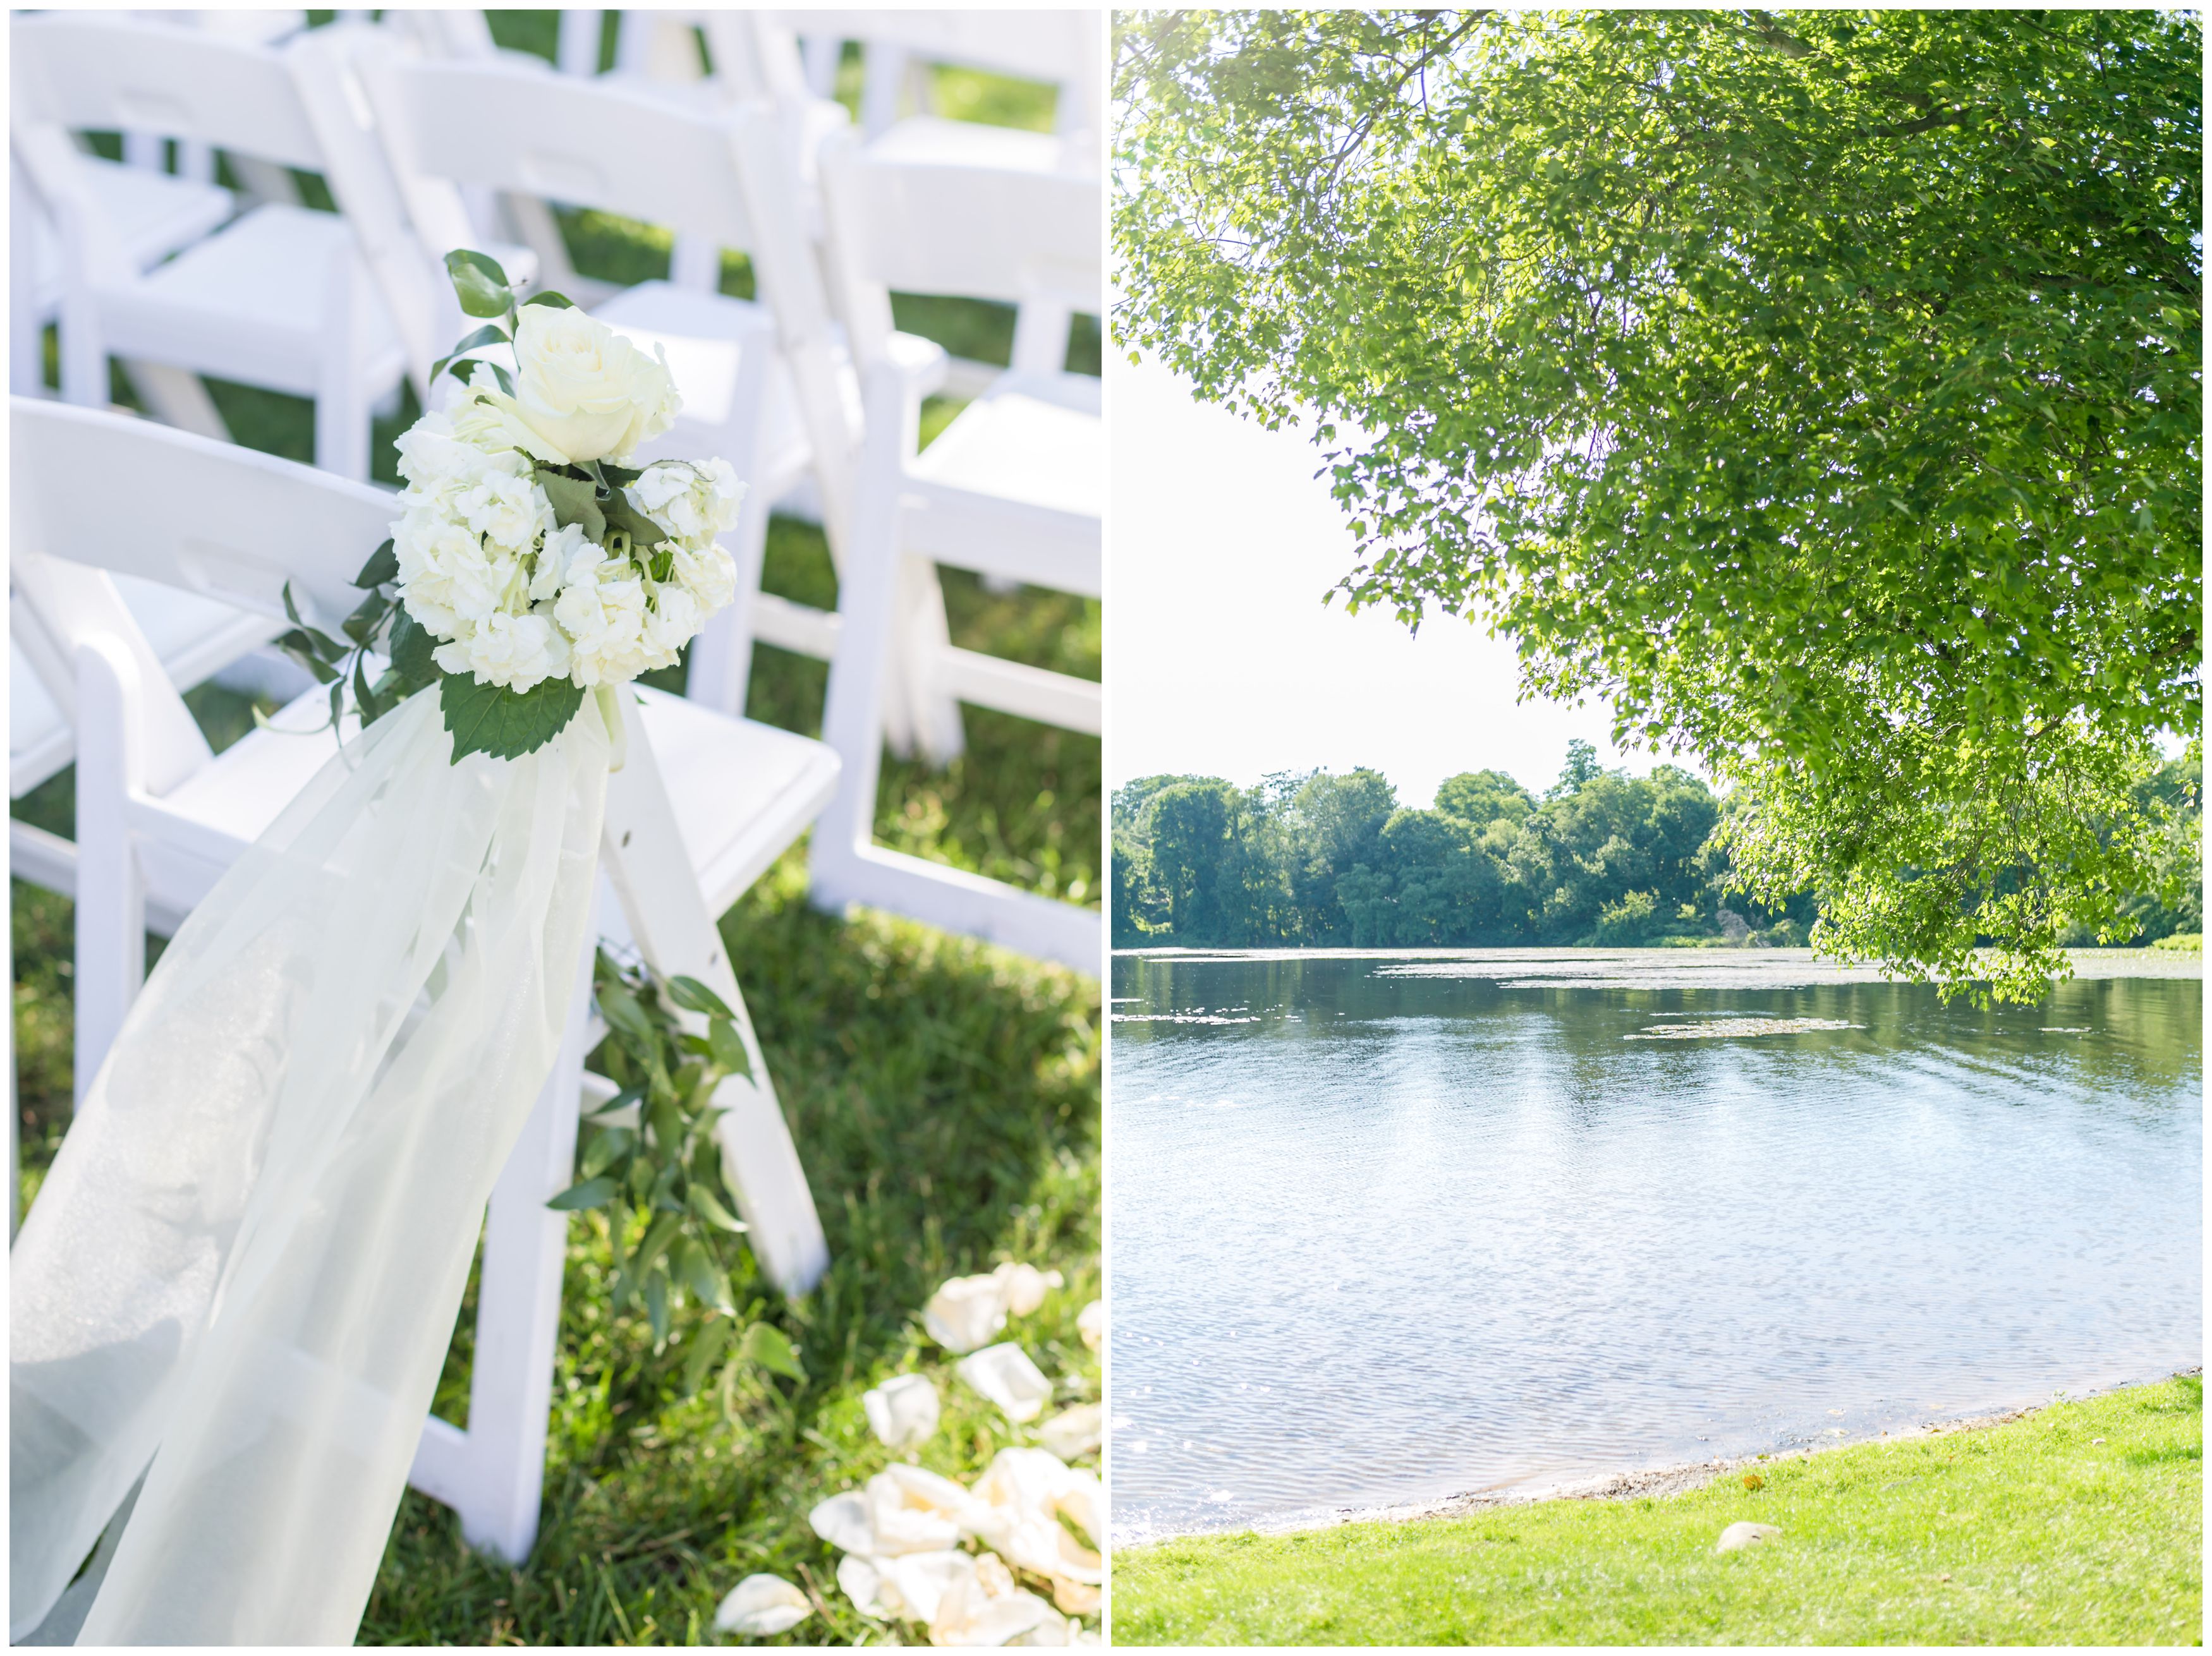 Outdoor white flowers at outdoor ceremony by the lake